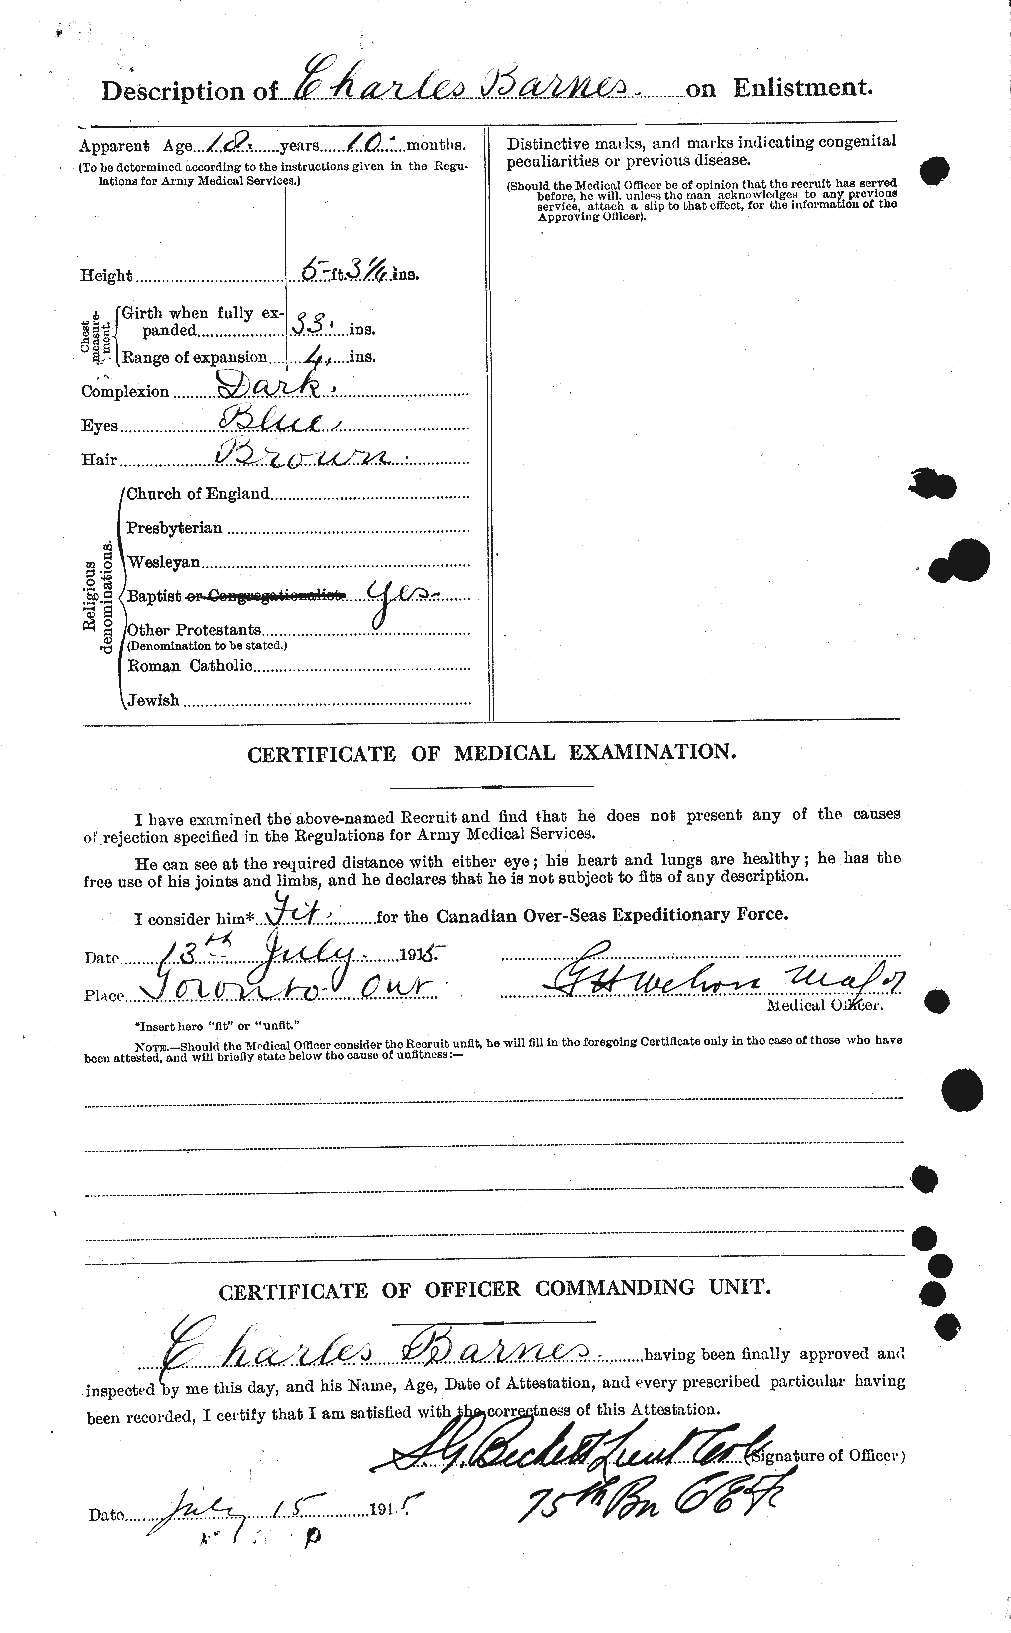 Personnel Records of the First World War - CEF 222630b